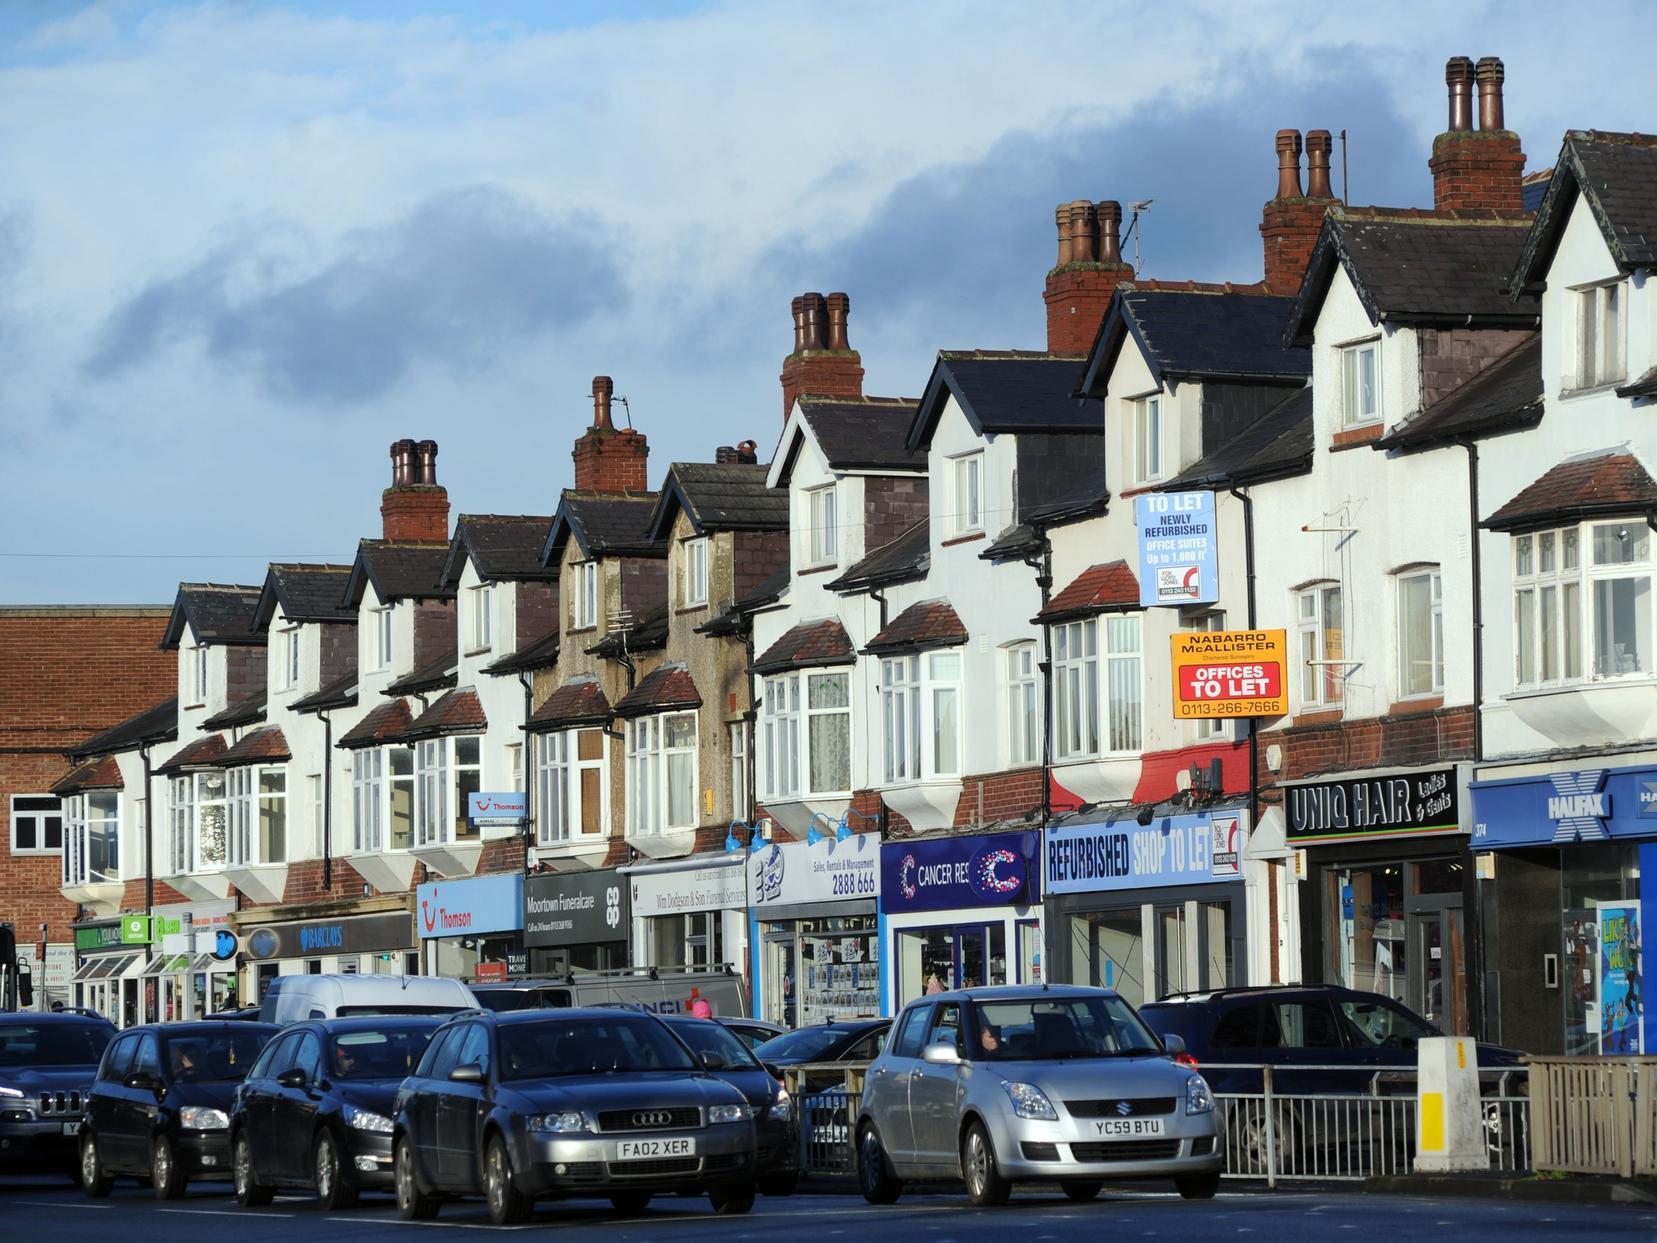 The average house price in the area is 281,000